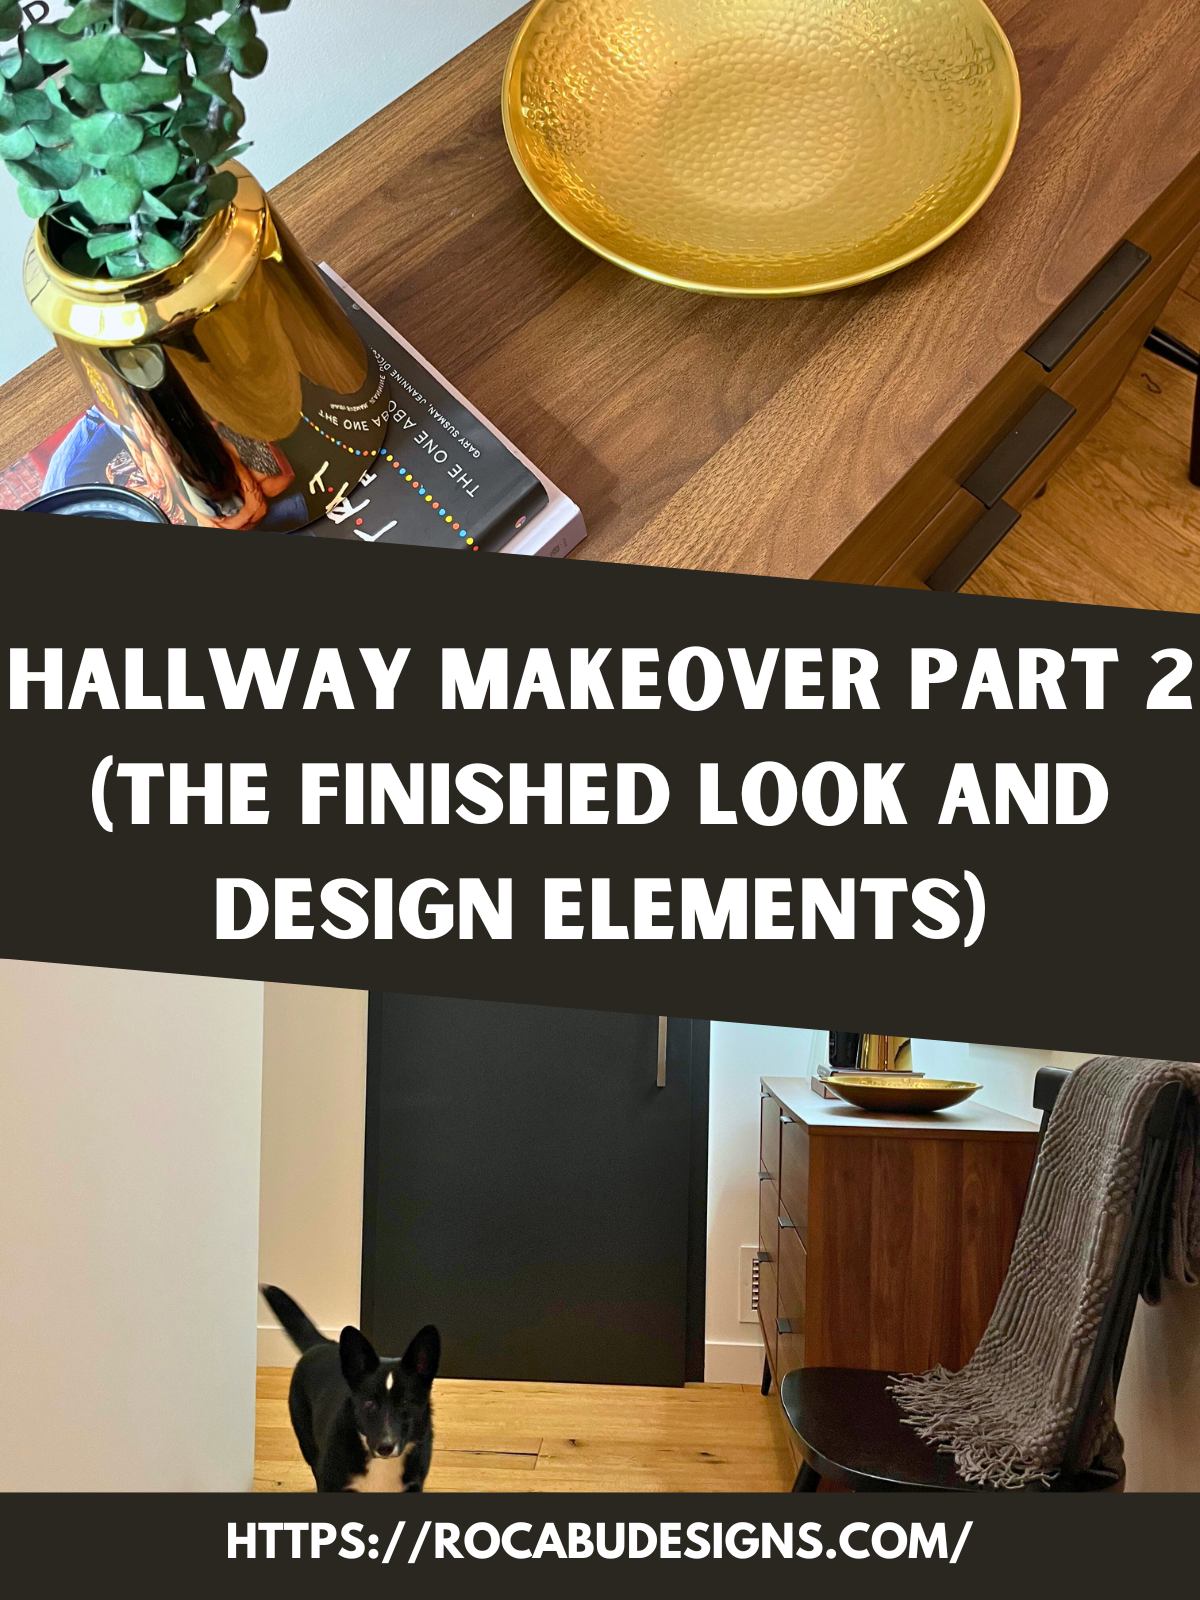 Hallway Makeover Part 2 (The Finished Look and Design Elements)